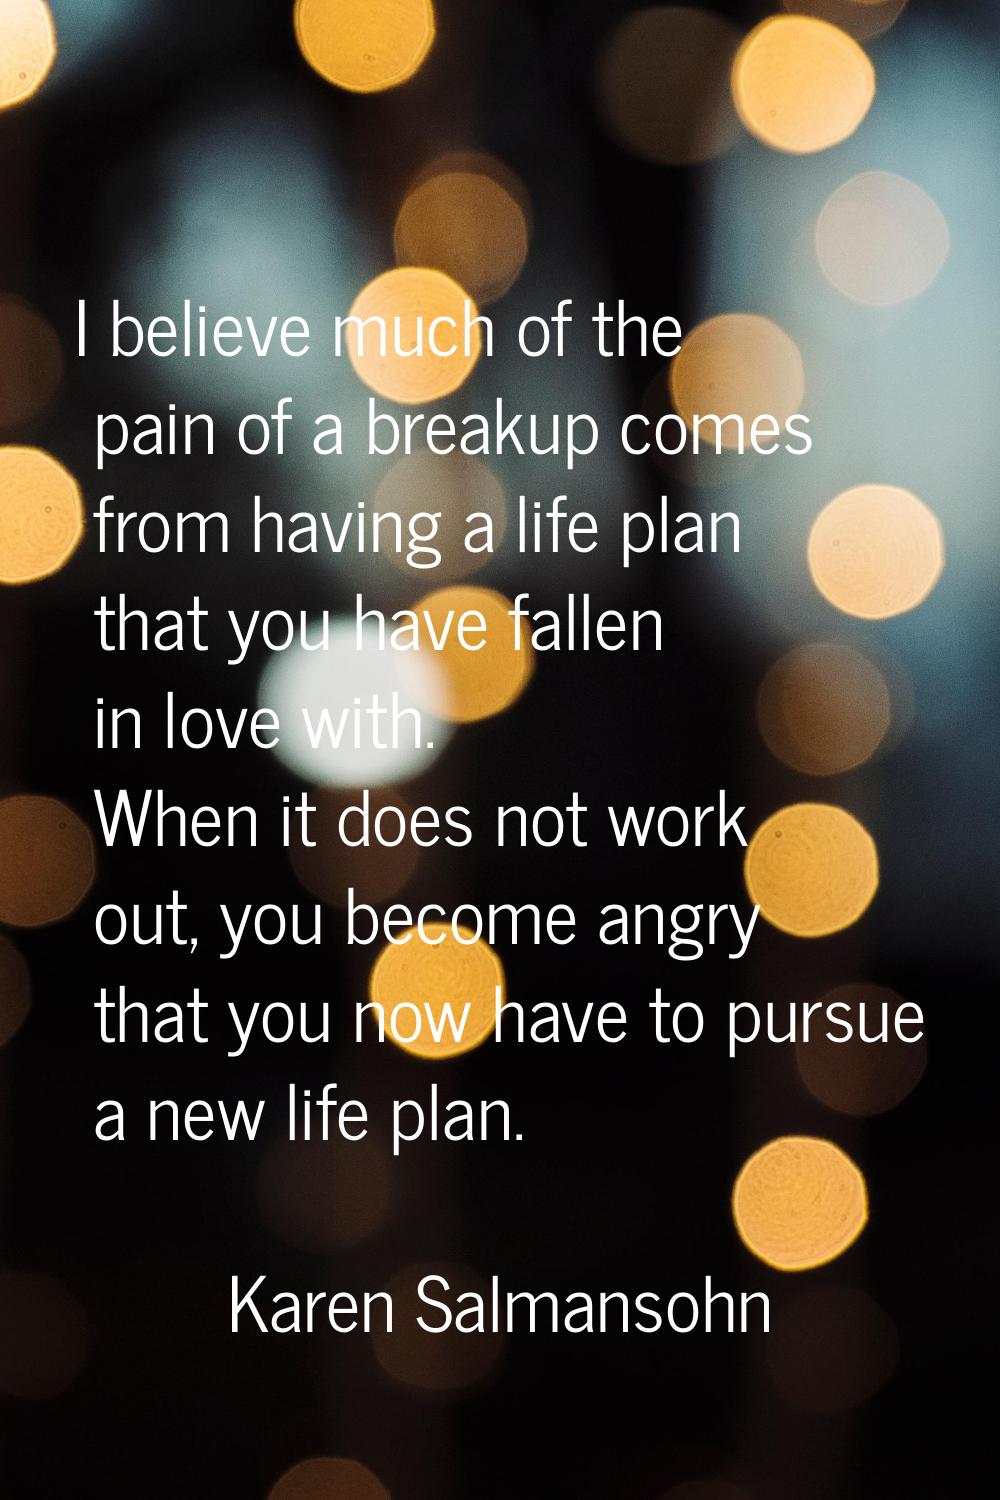 I believe much of the pain of a breakup comes from having a life plan that you have fallen in love 